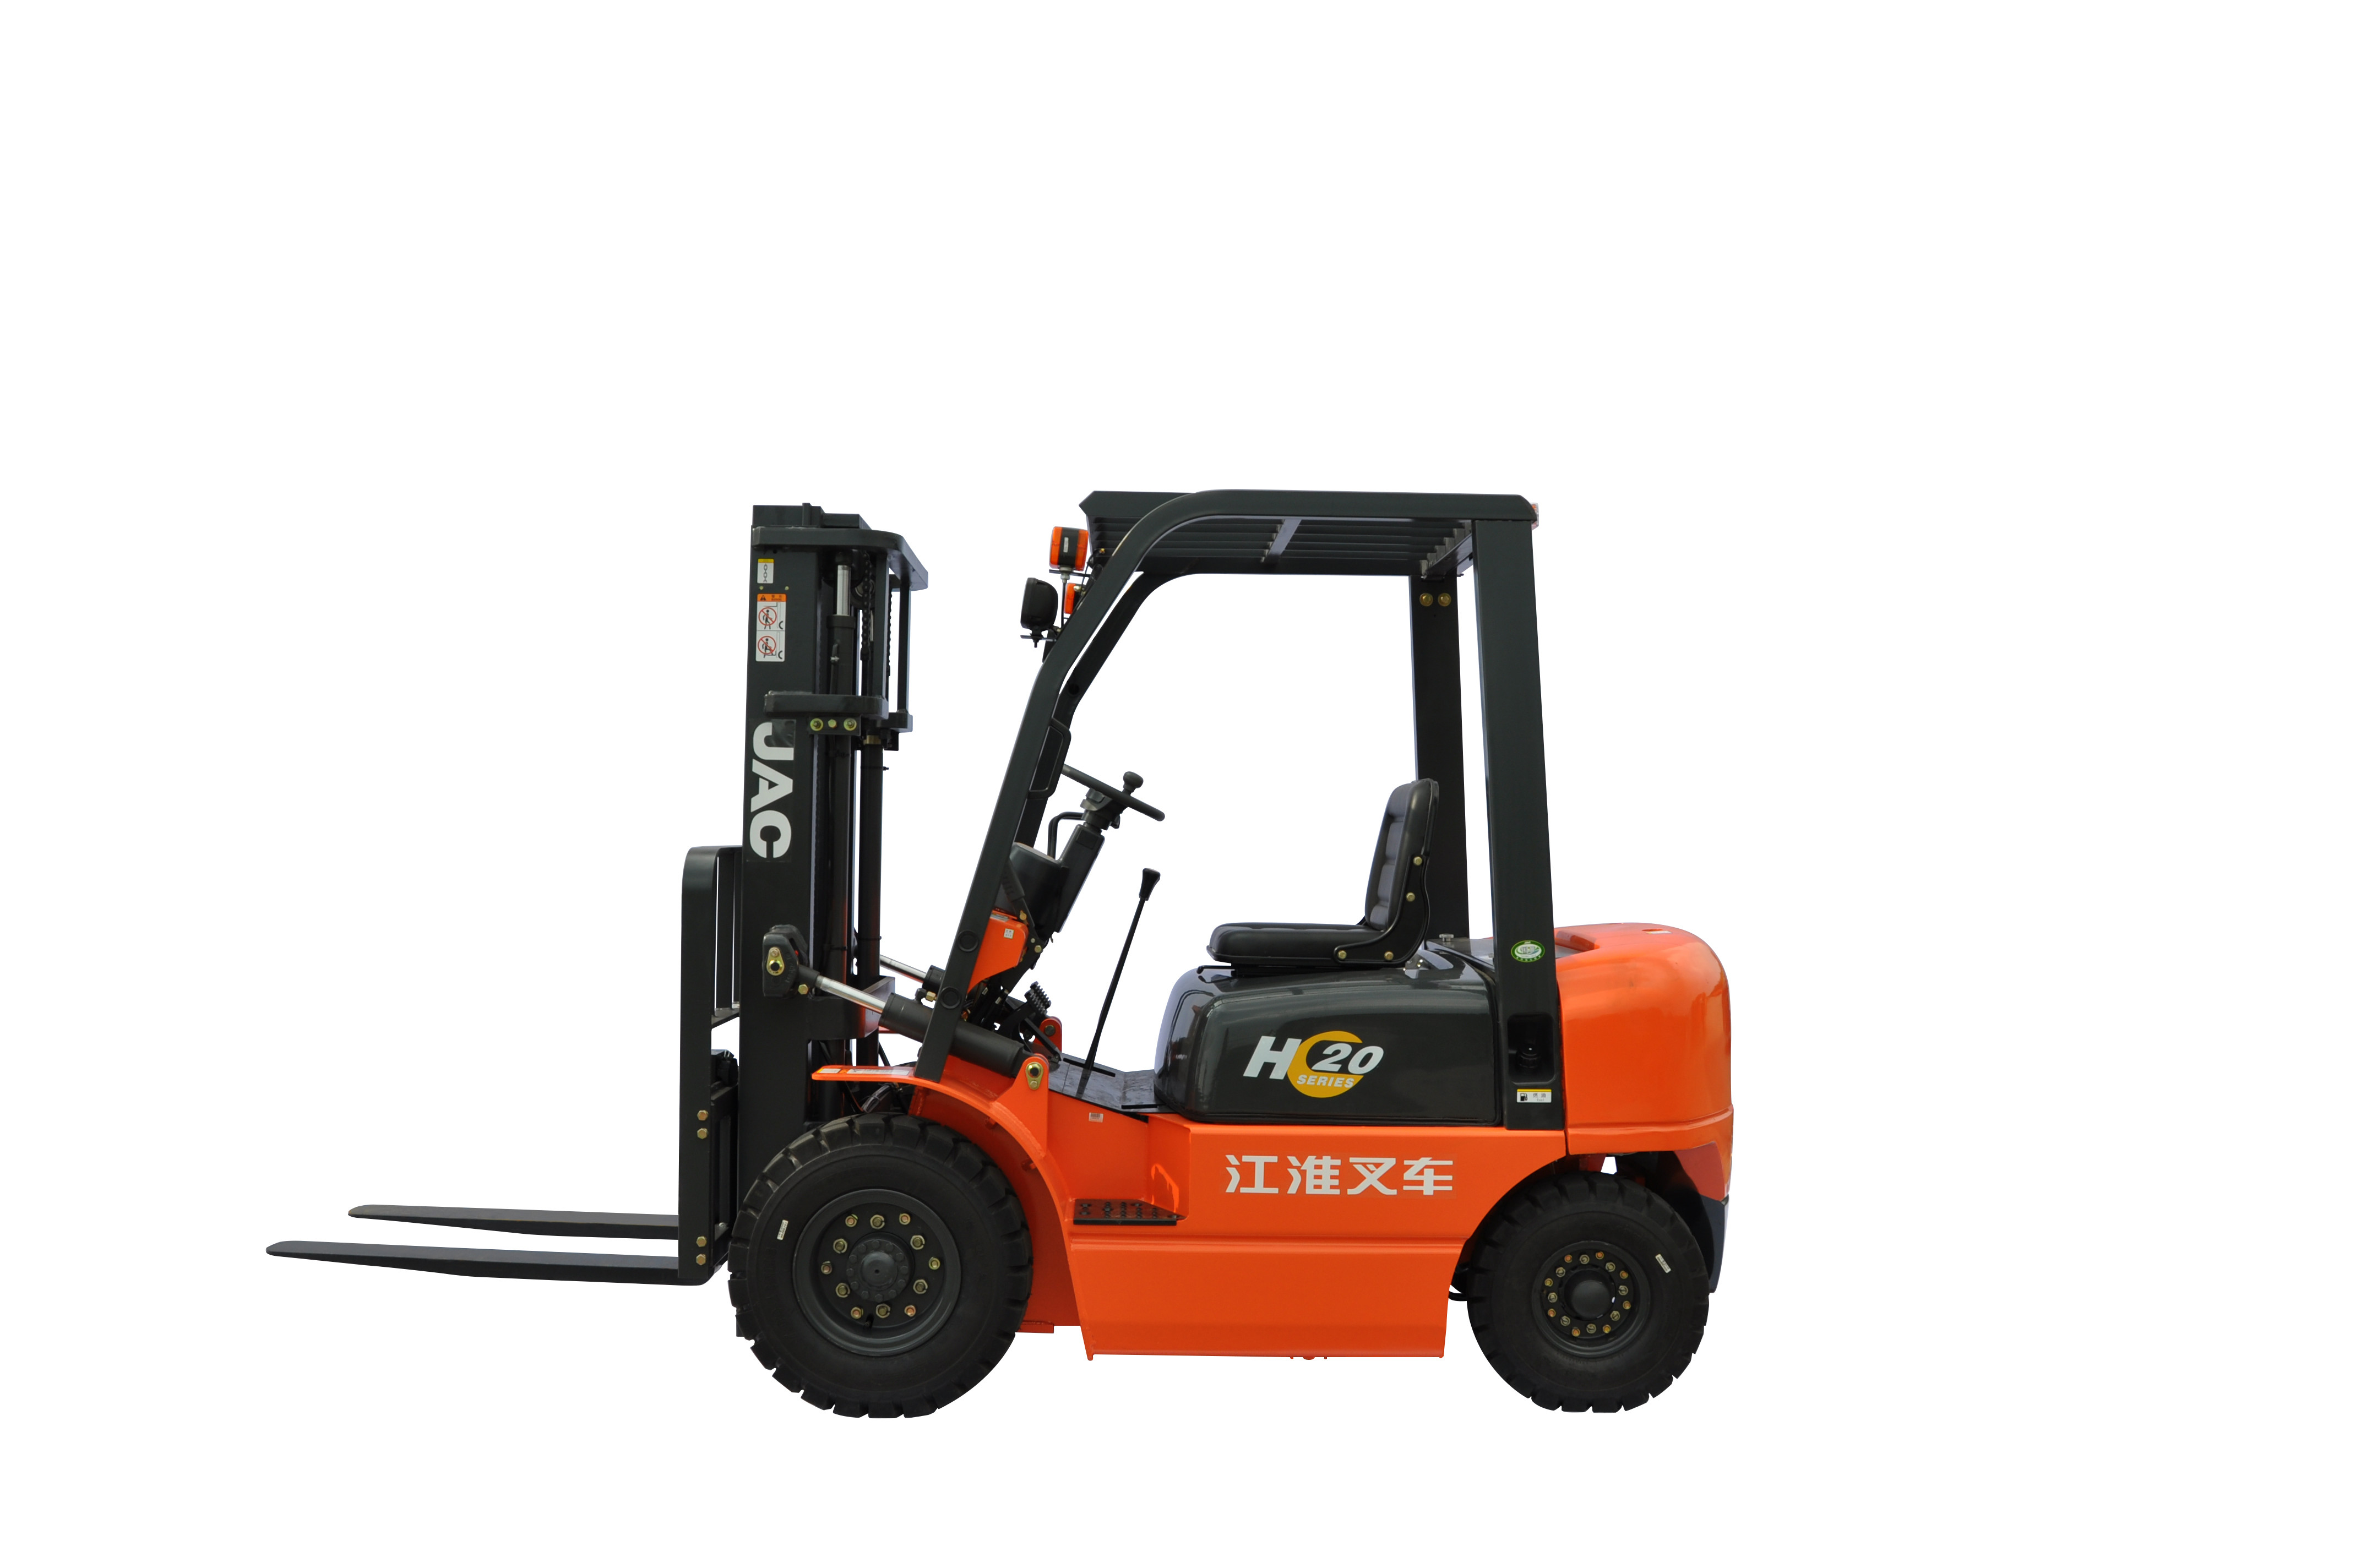  JAC Diesel Forklift Truck , Lifted Diesel Trucks With Excellent Manoeuvrability Manufactures